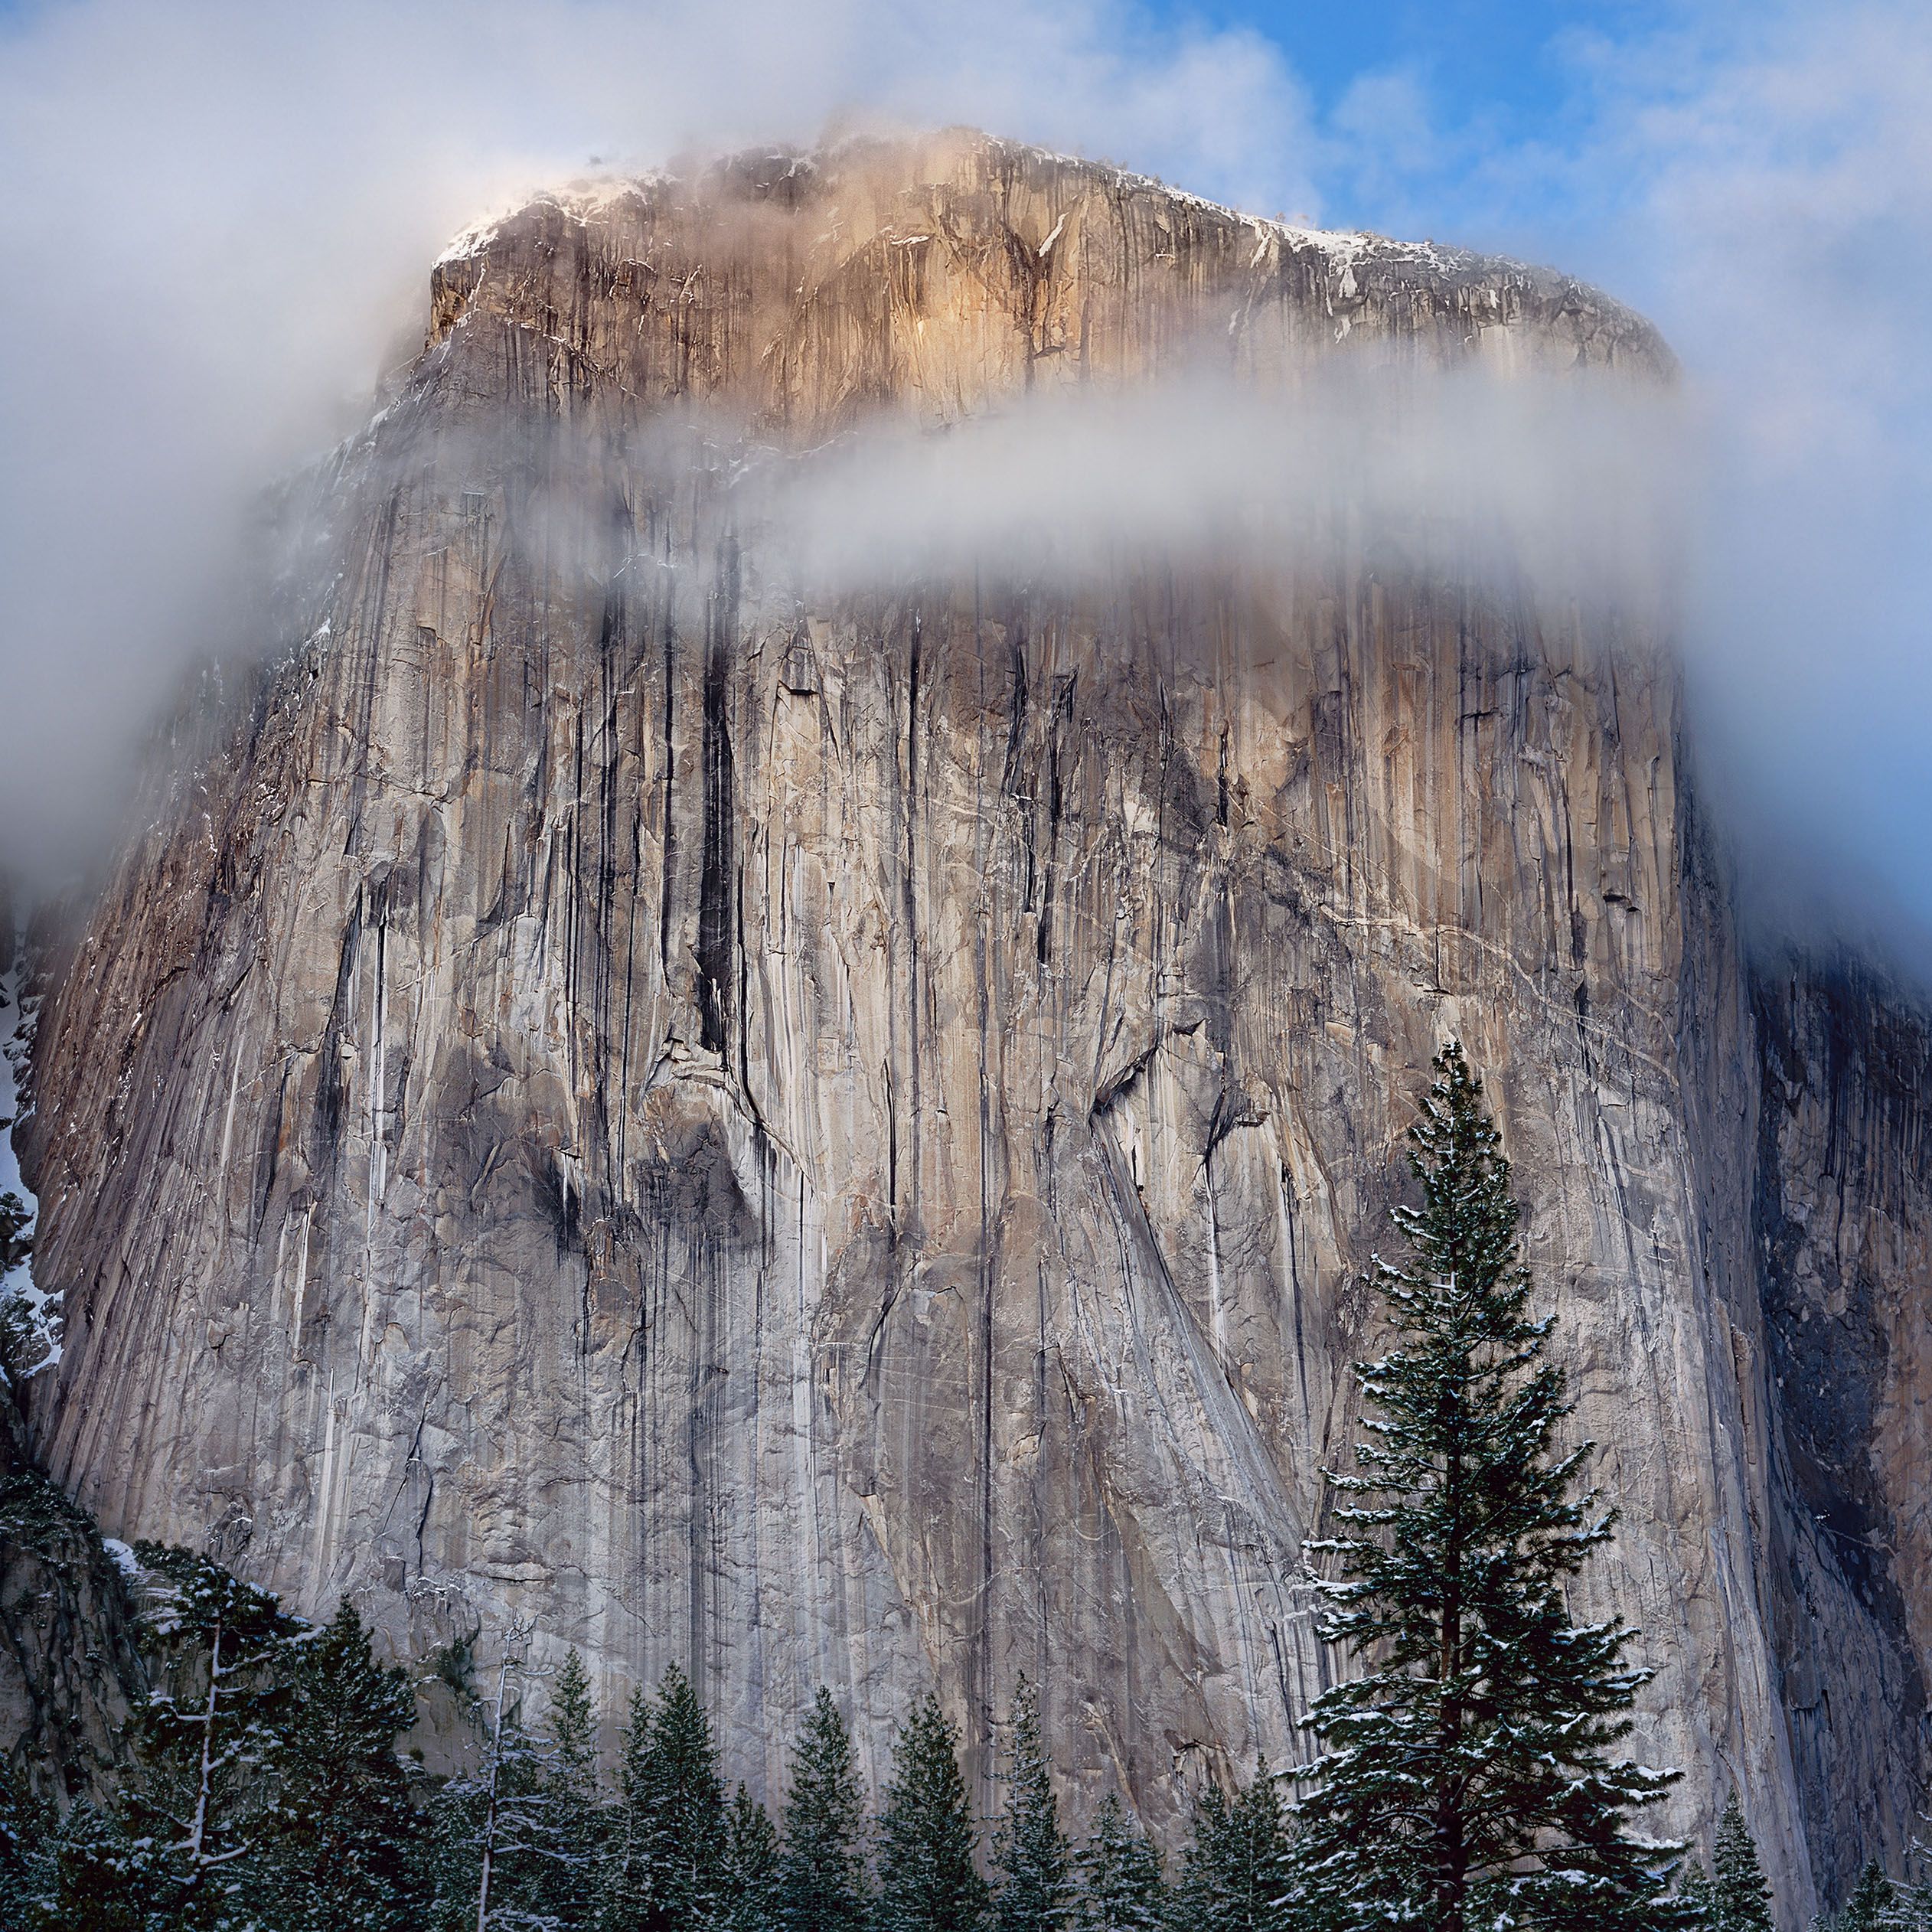 Yosemite National Park wallpaper for iPhone and iPad